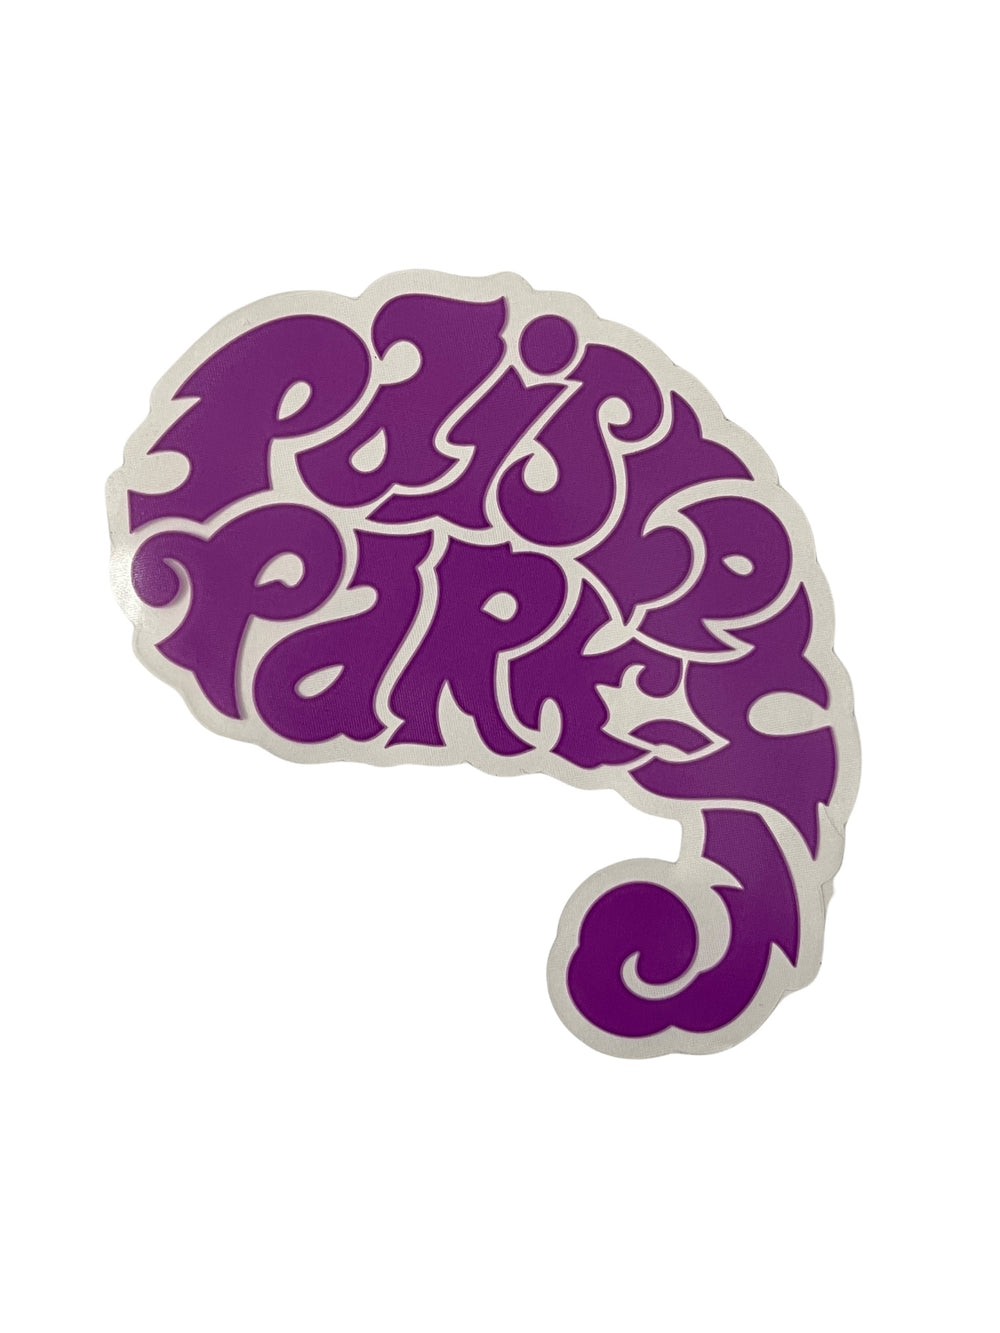 Paisley Park Official Window Decal Brand New Purple Logo Prince